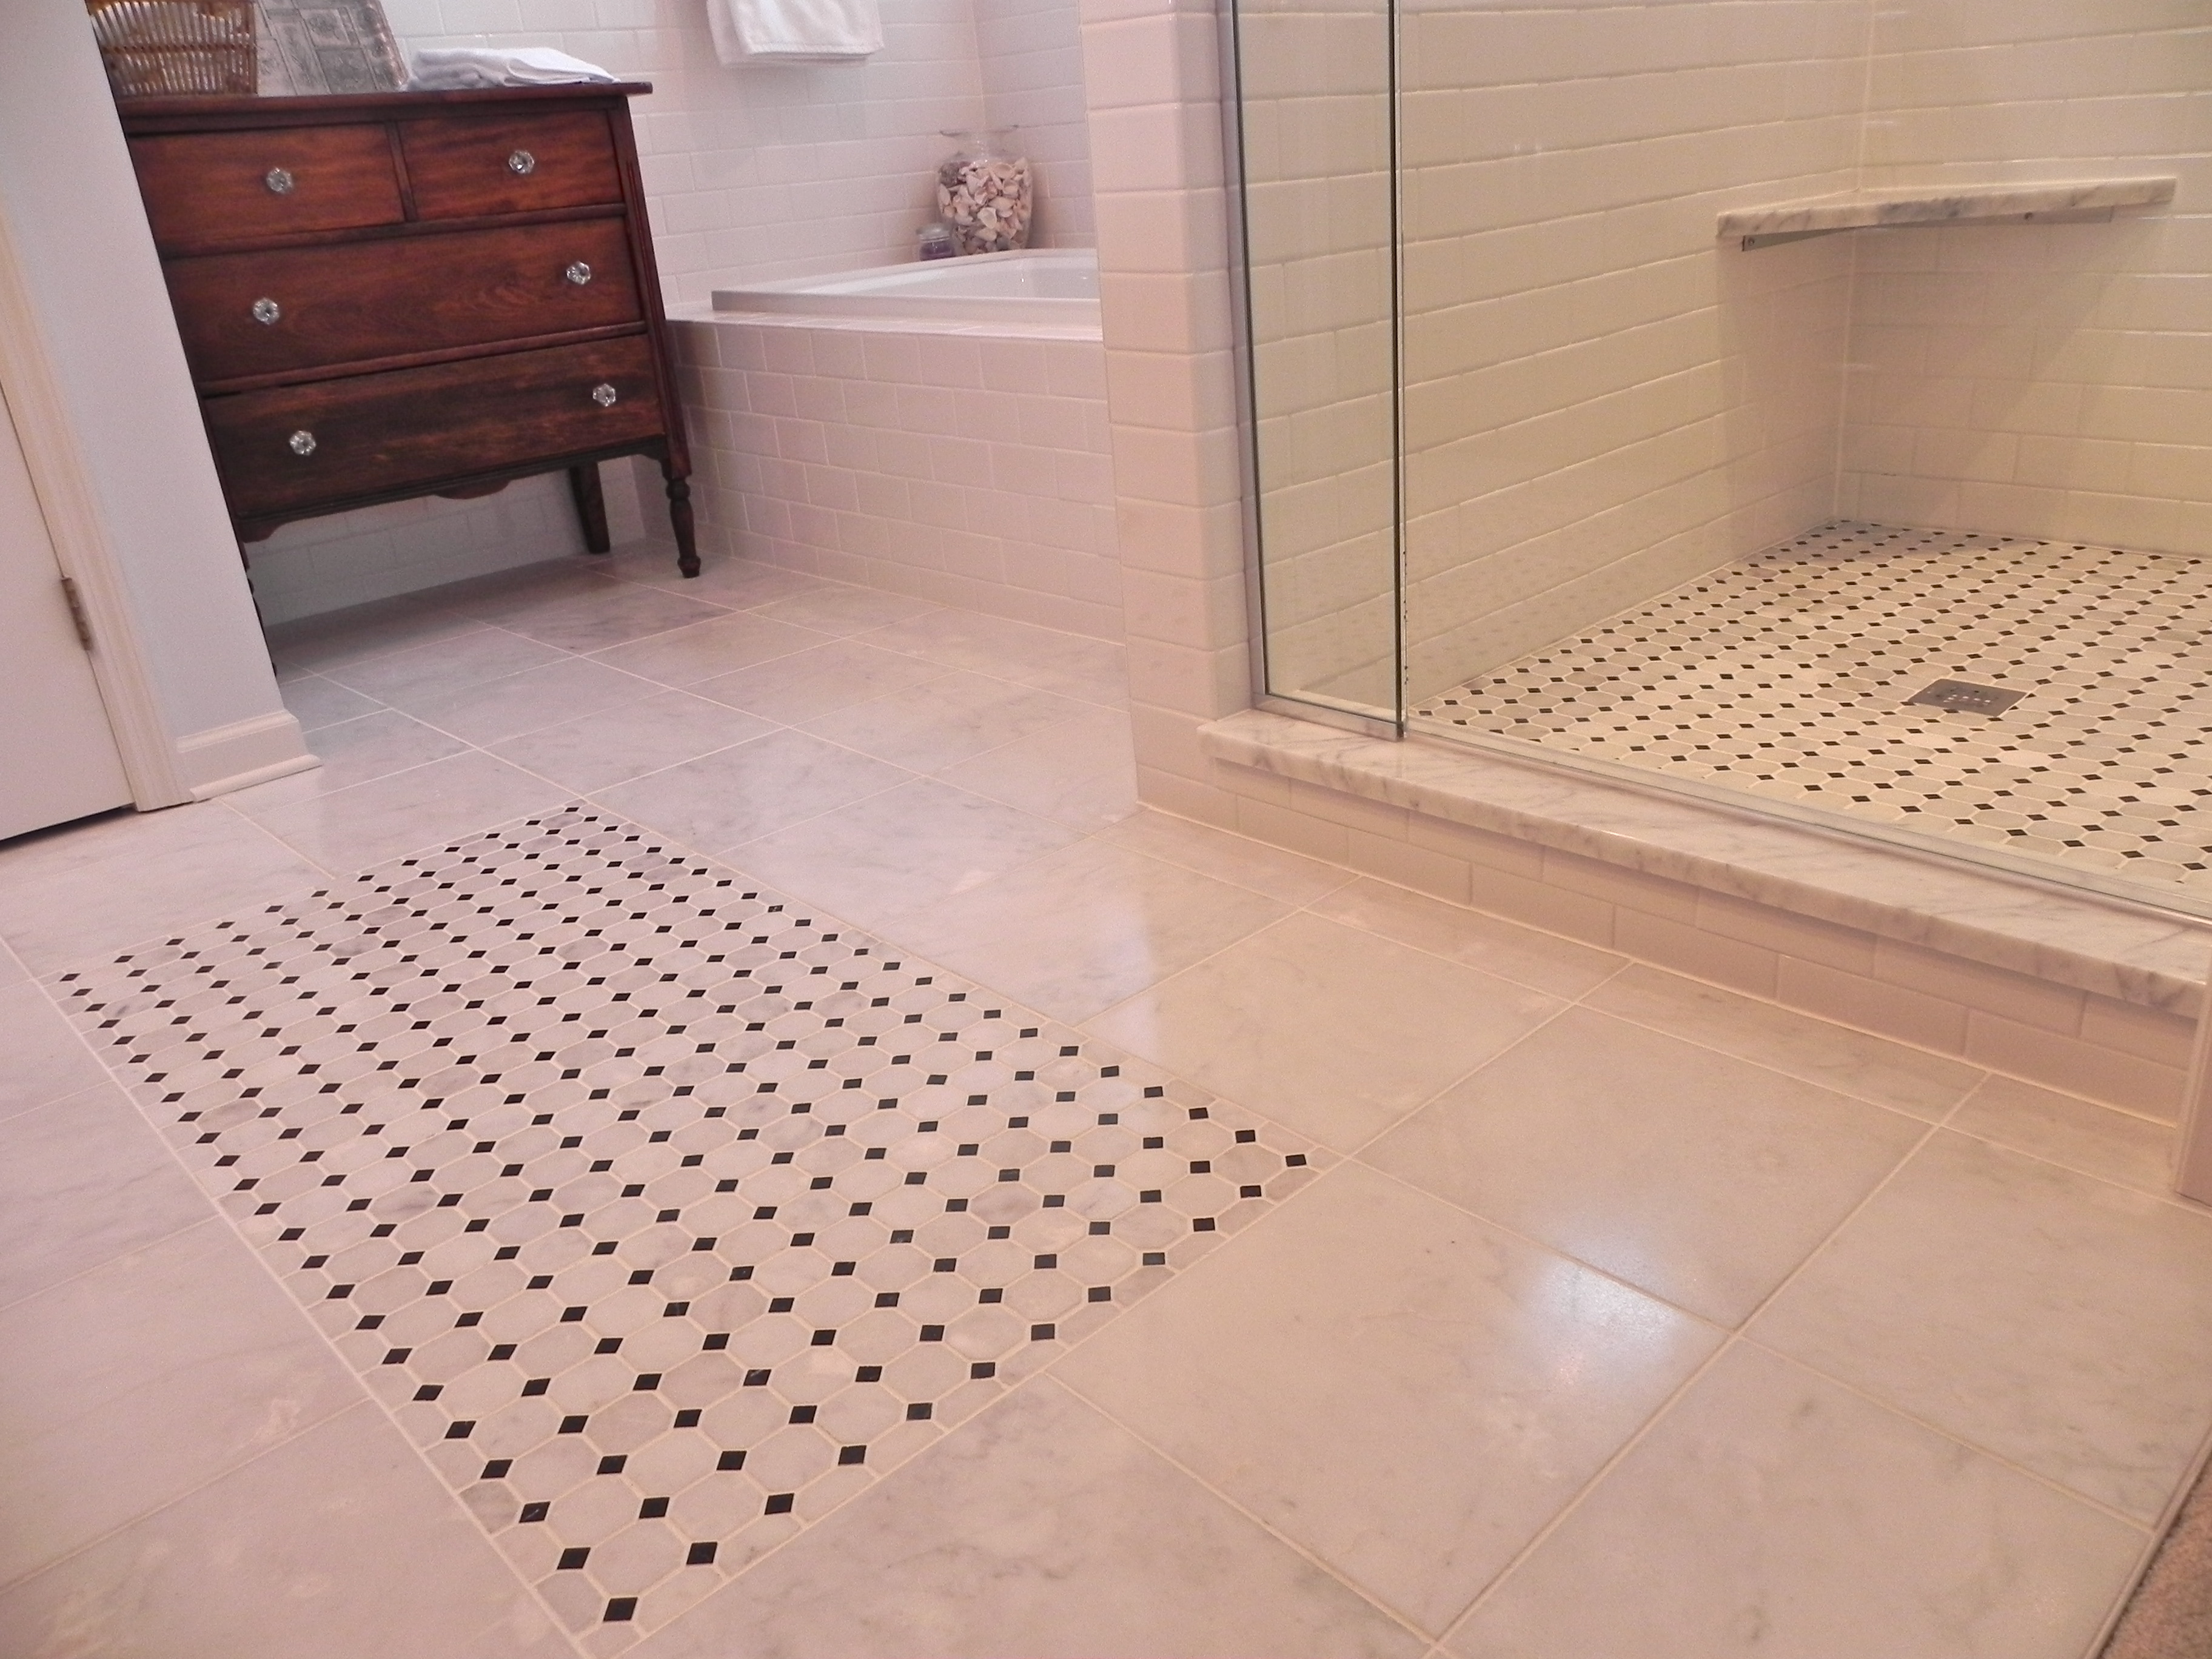 The style of tile flooring